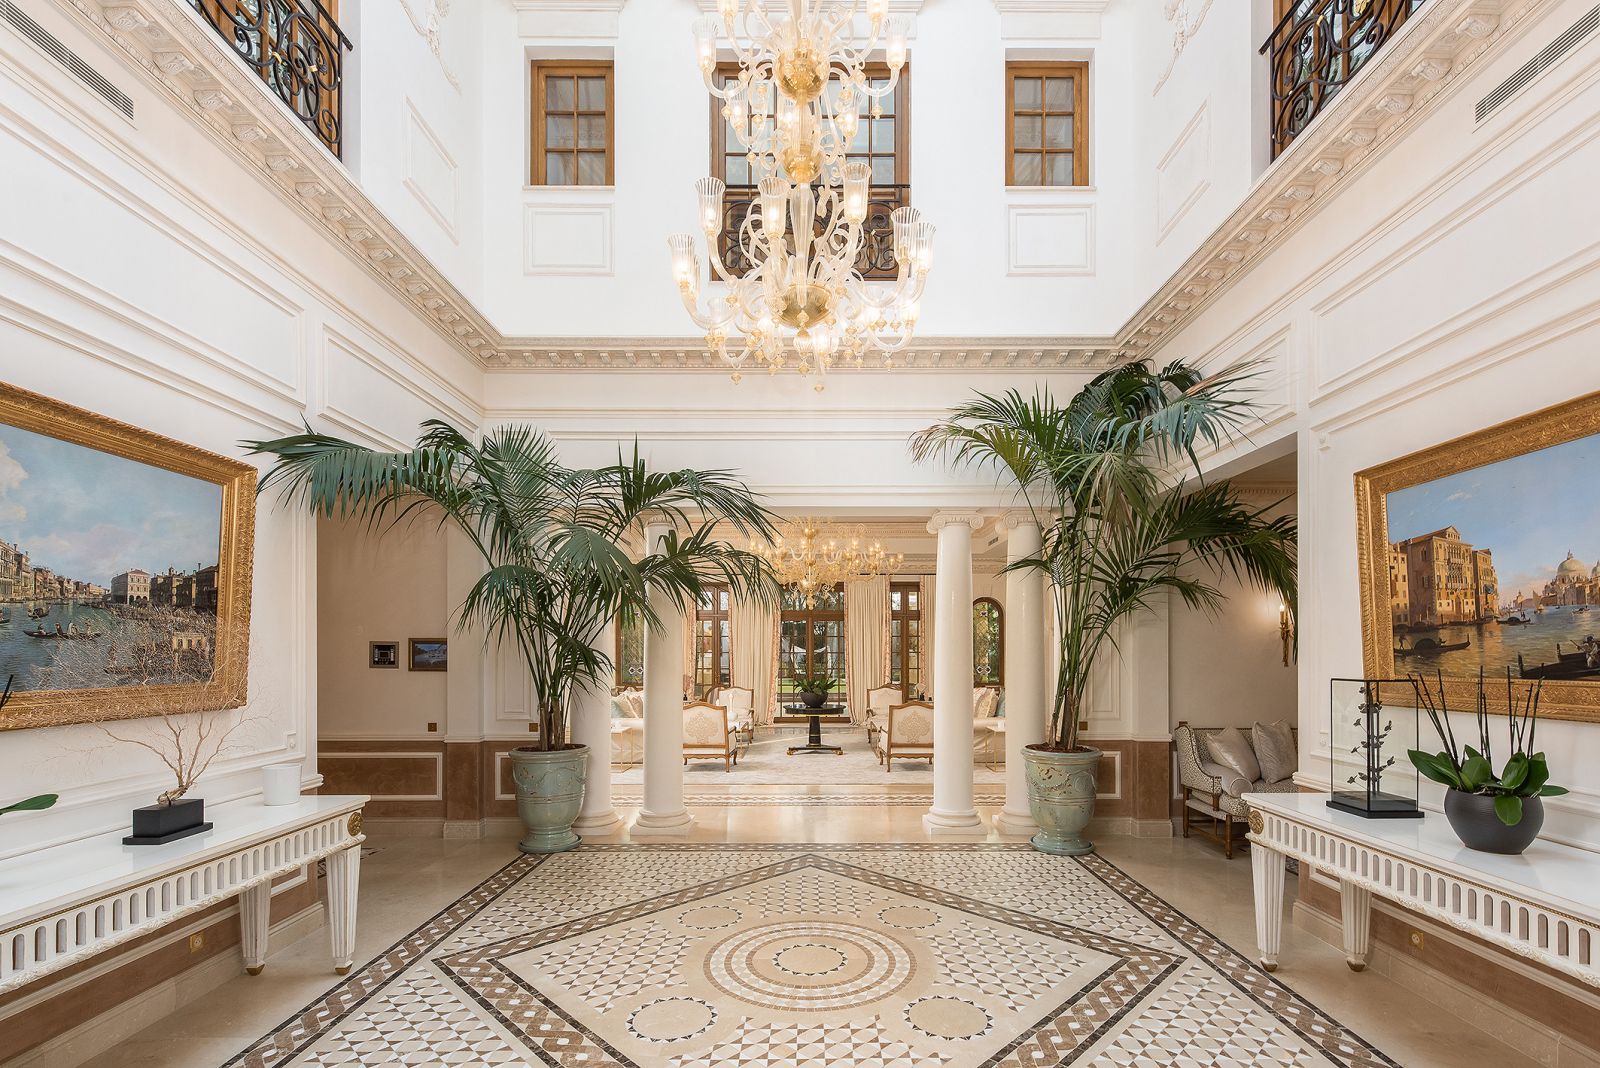 Palais Vénitien, extraordinary palatial property in Cannes, France | FINEST RESIDENCES